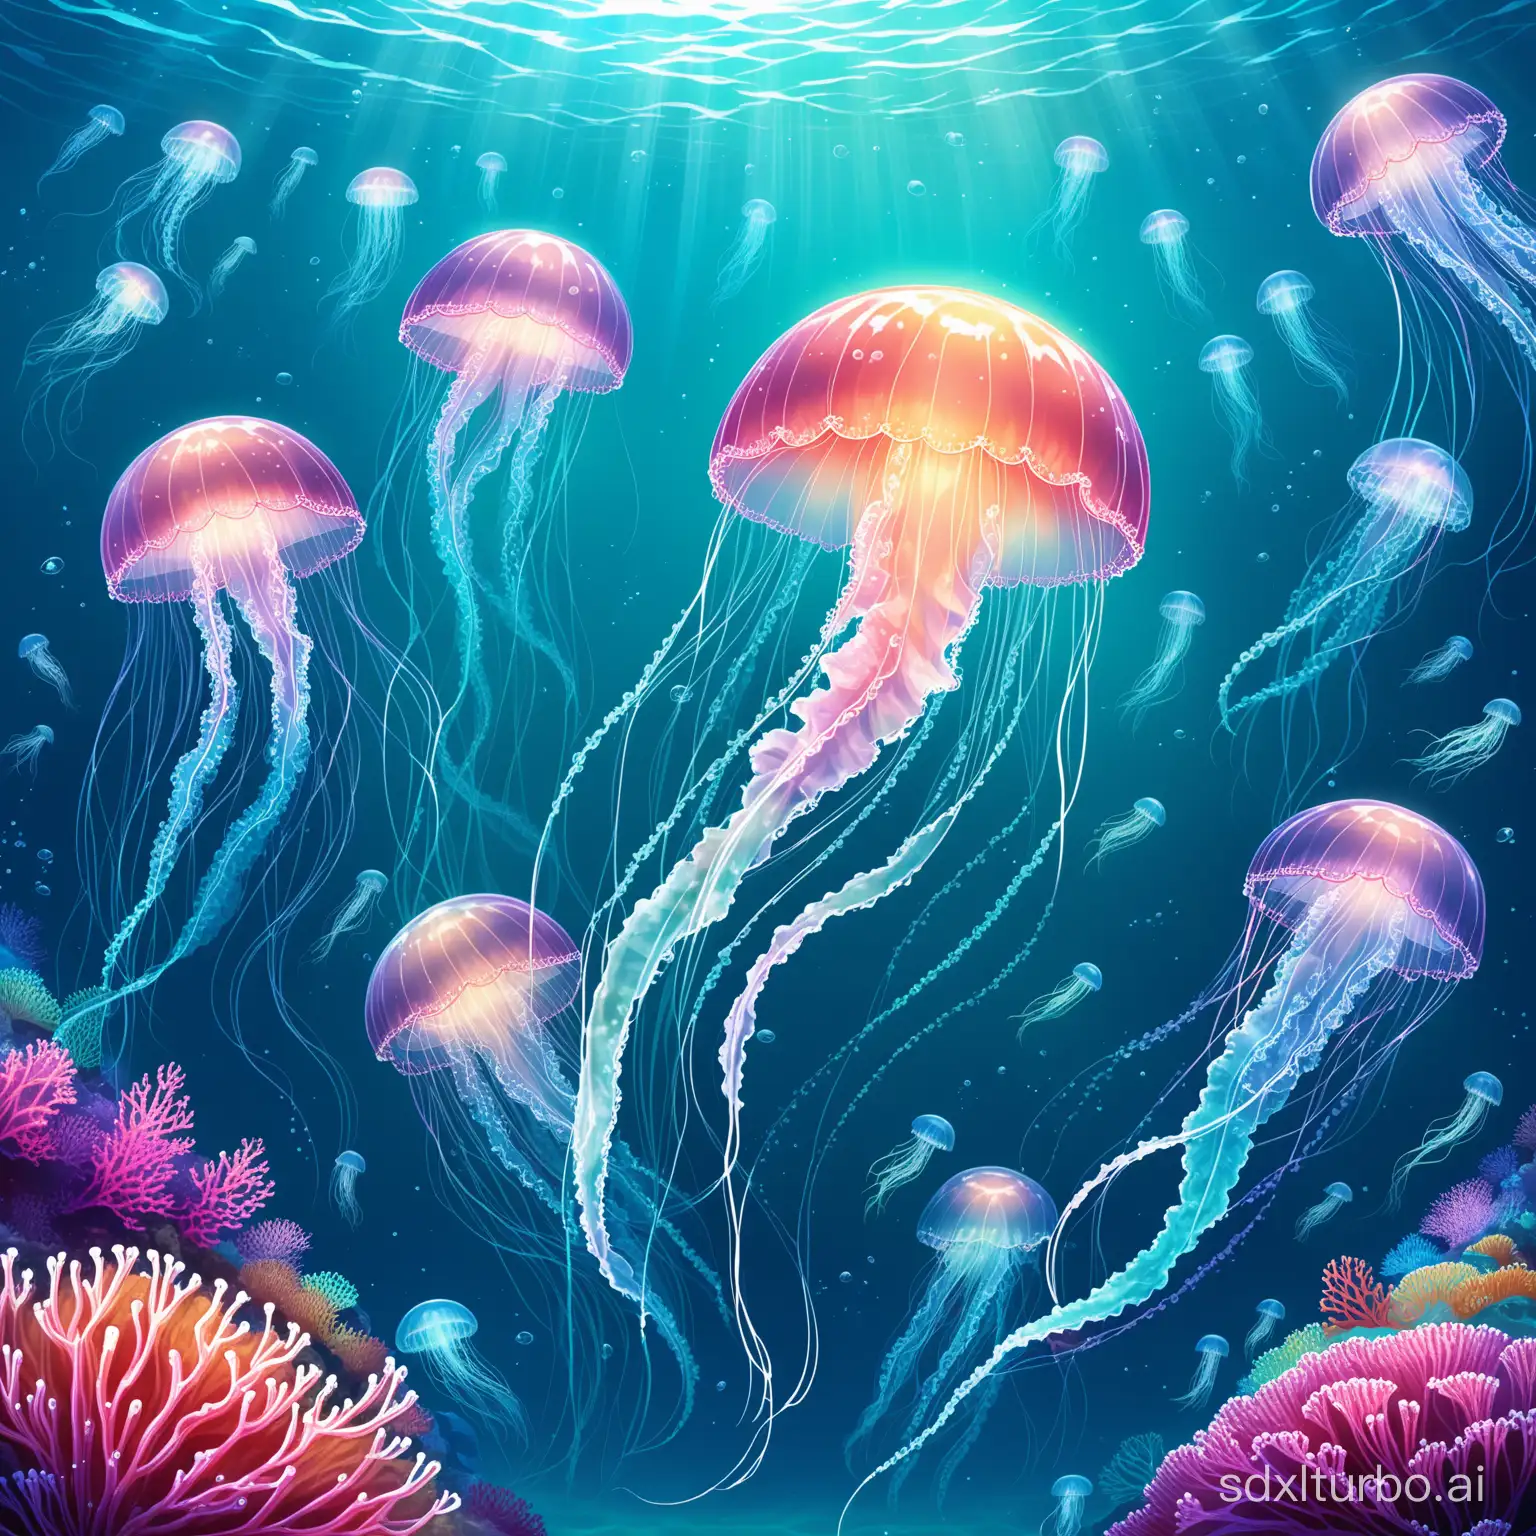 The world of jellyfish in the ocean.